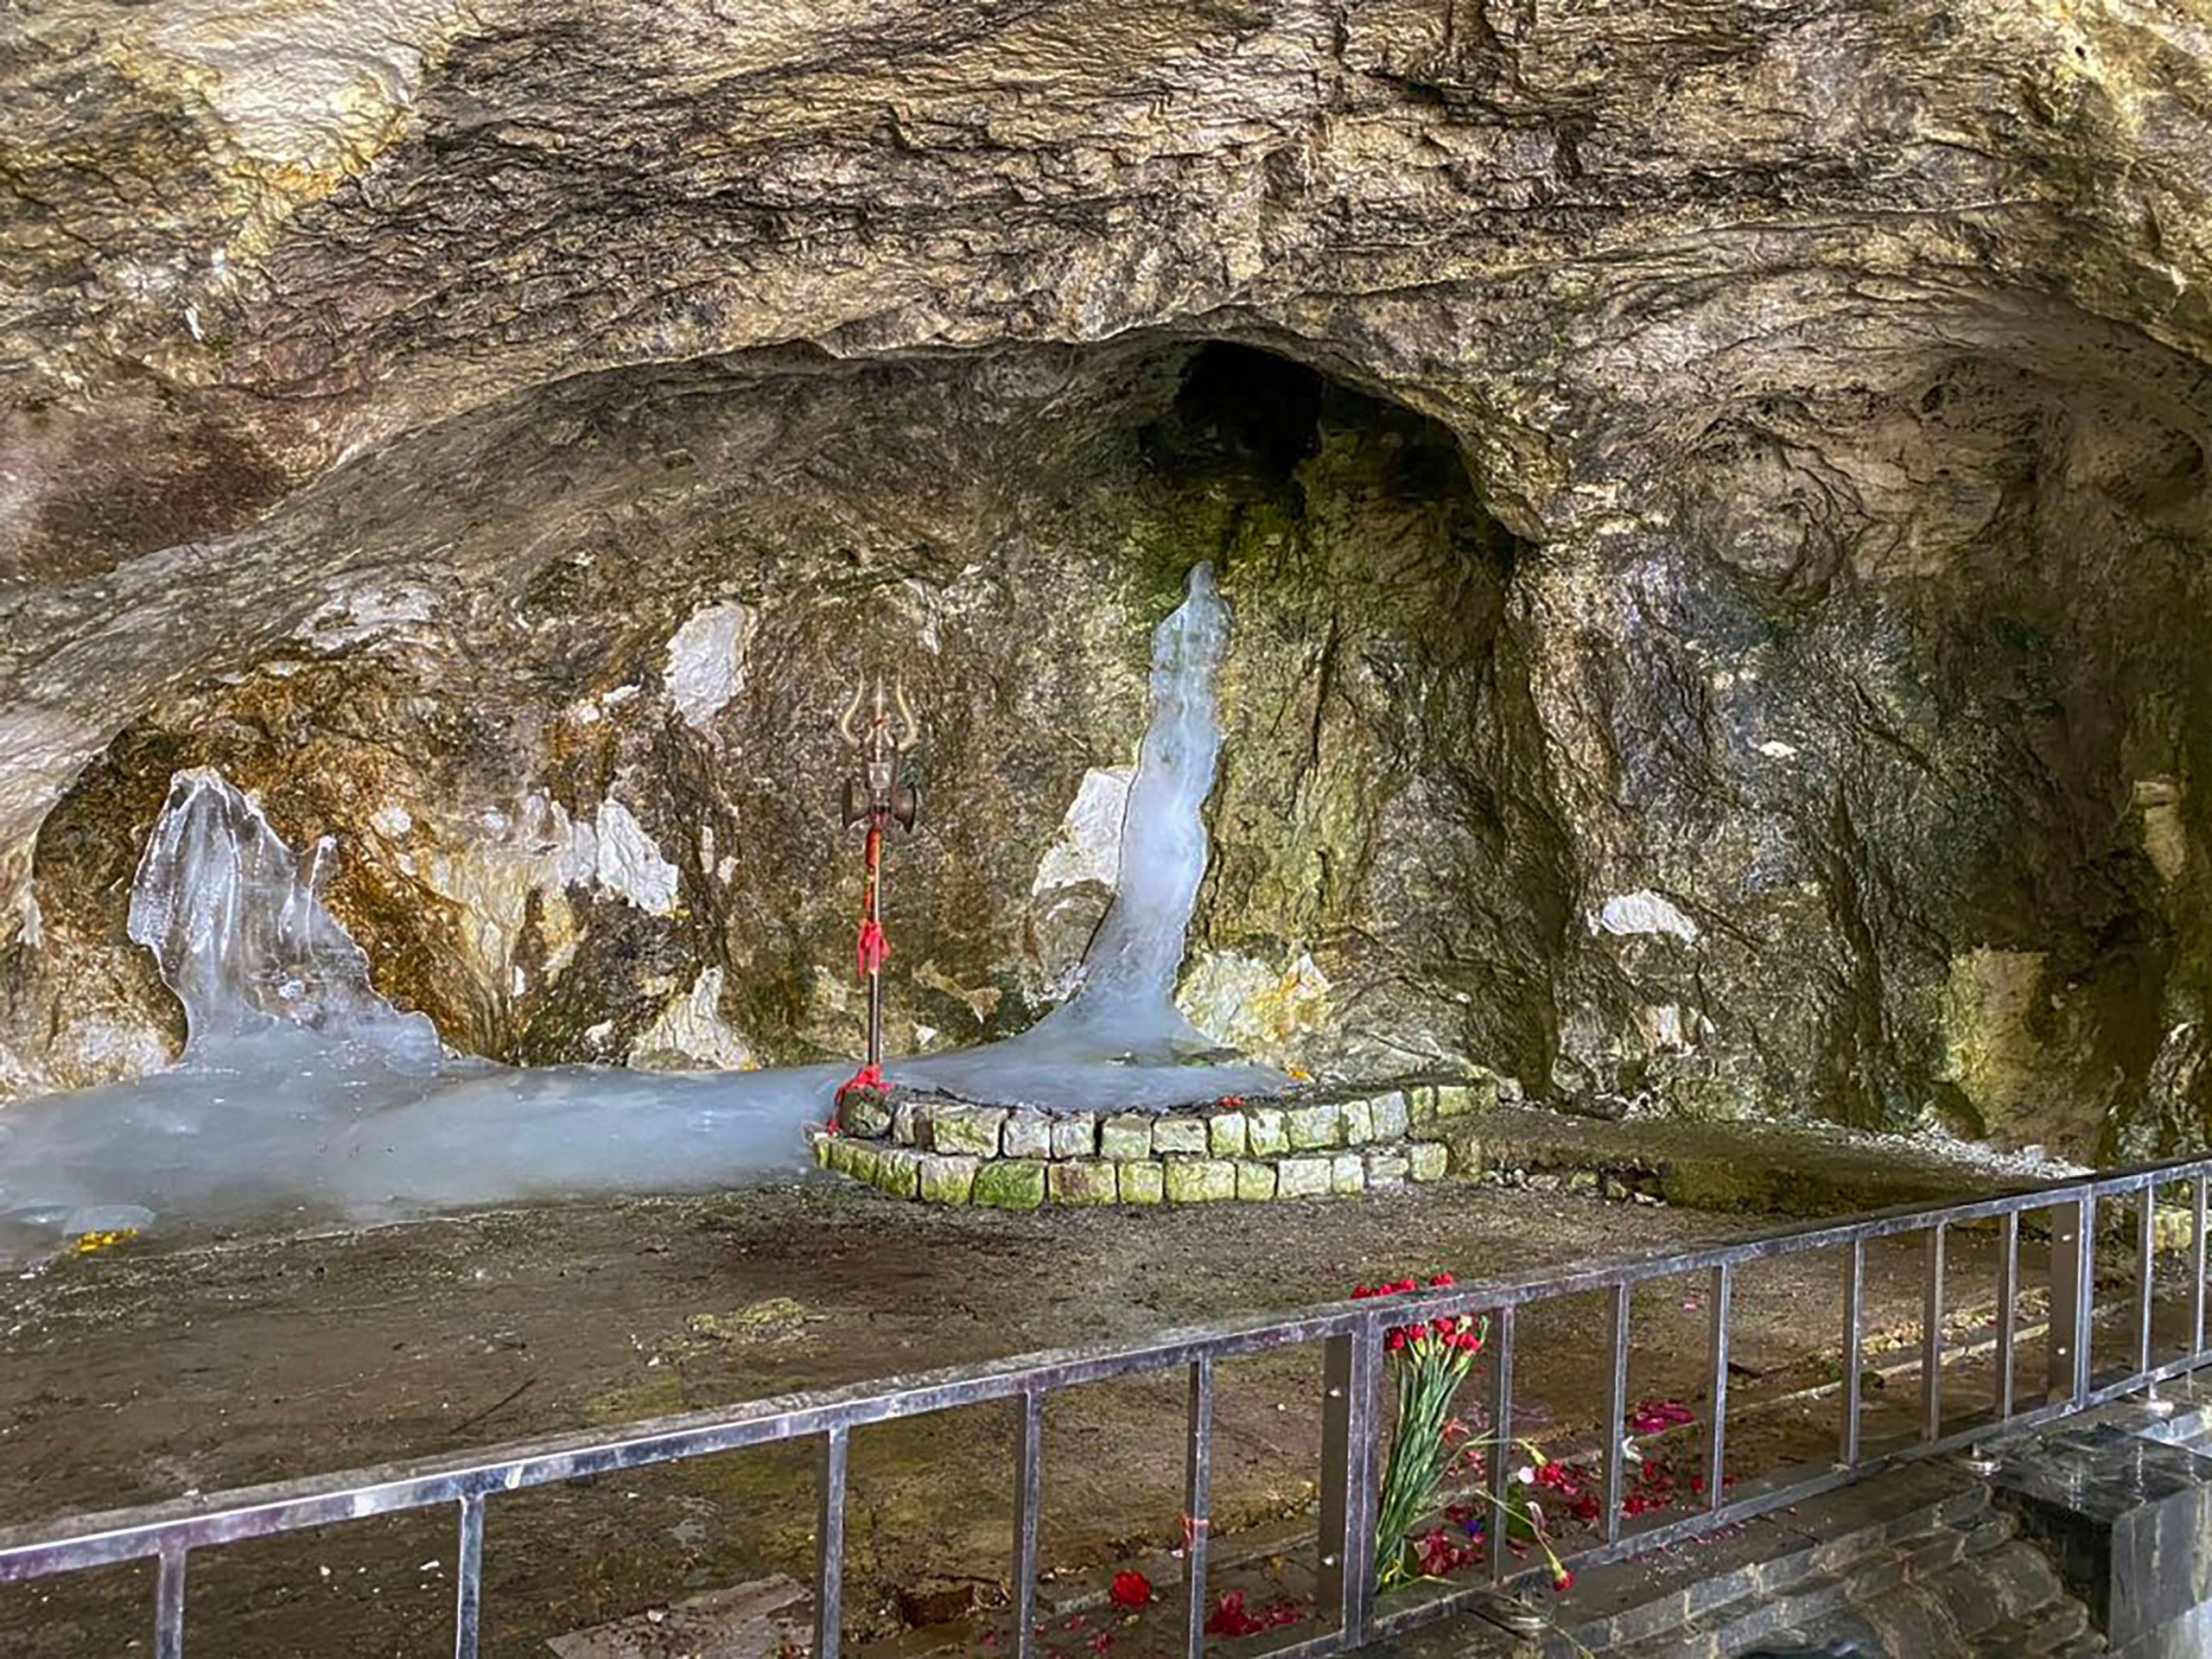 Amarnath yatra commences on June 28, registration from April 1: All you need to know